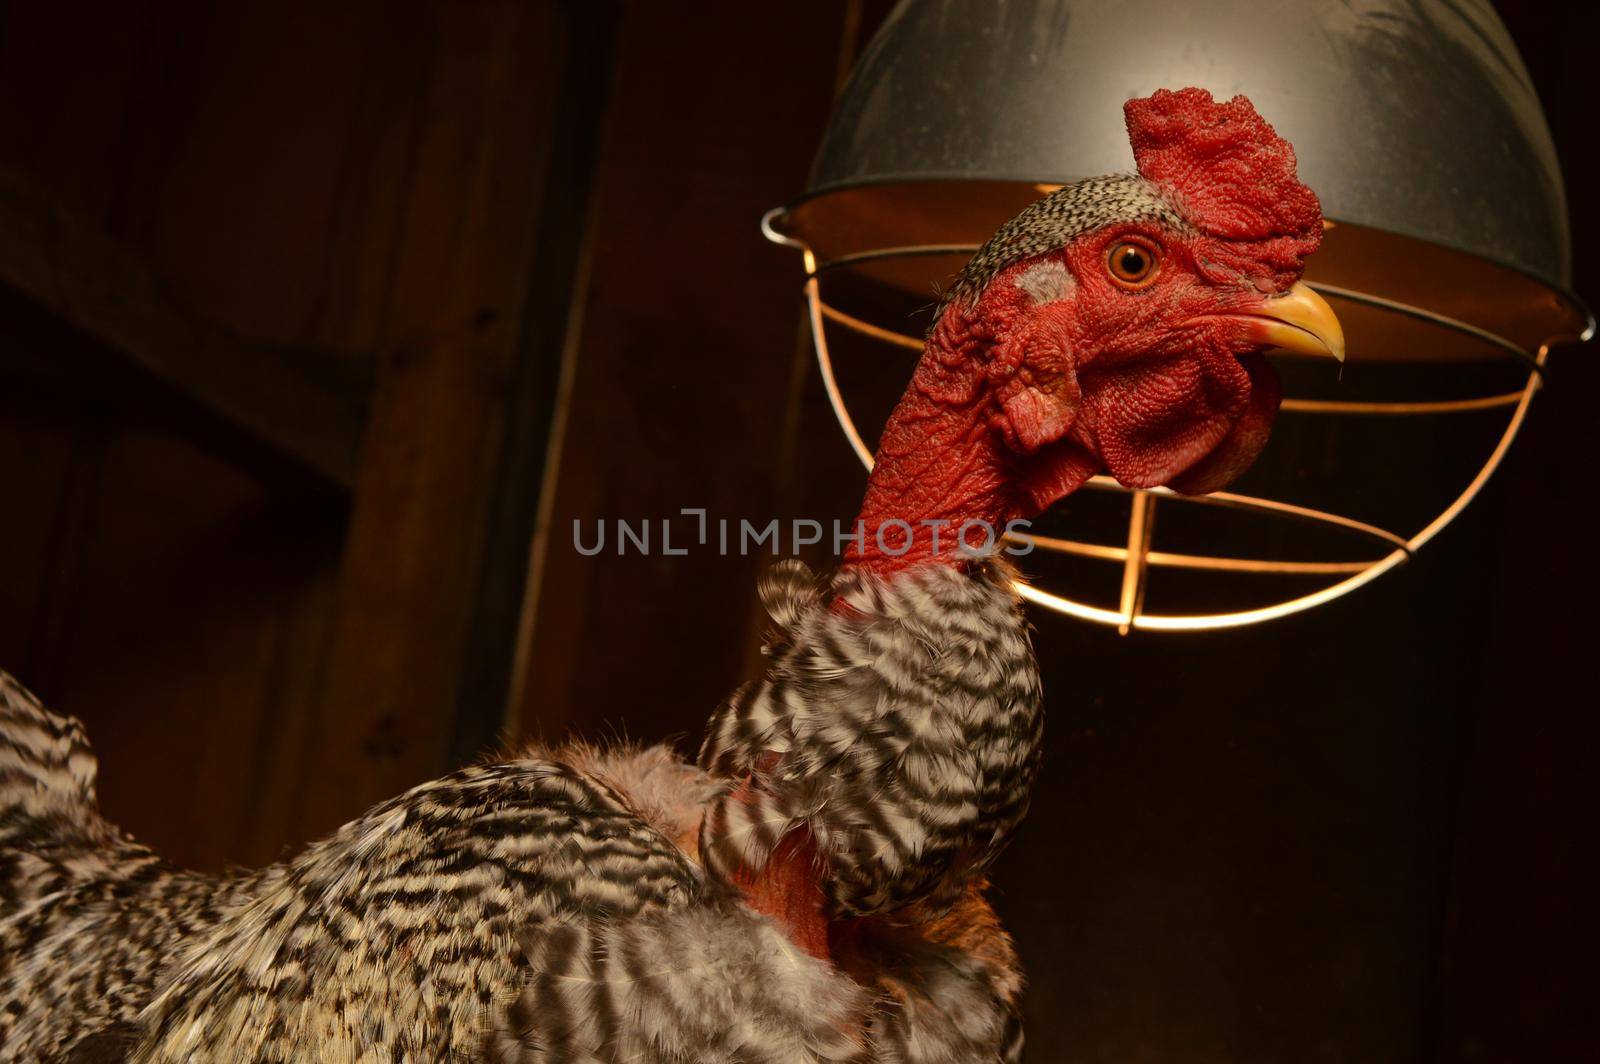 Inside The Chicken Coop by AlphaBaby